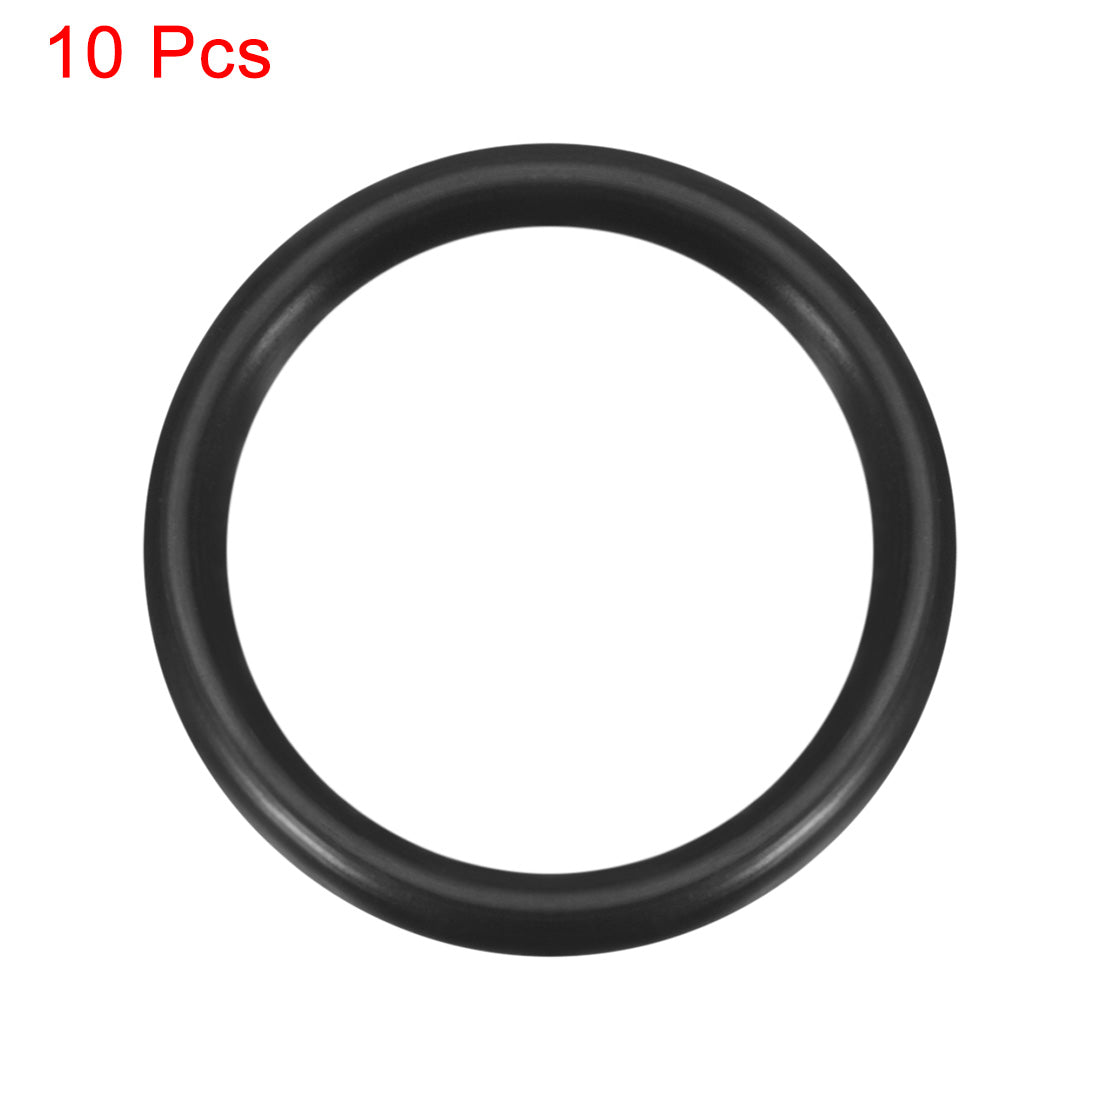 uxcell Uxcell O-Rings Nitrile Rubber 28mm x 33.3mm x 2.65mm Seal Rings Sealing Gasket 10pcs